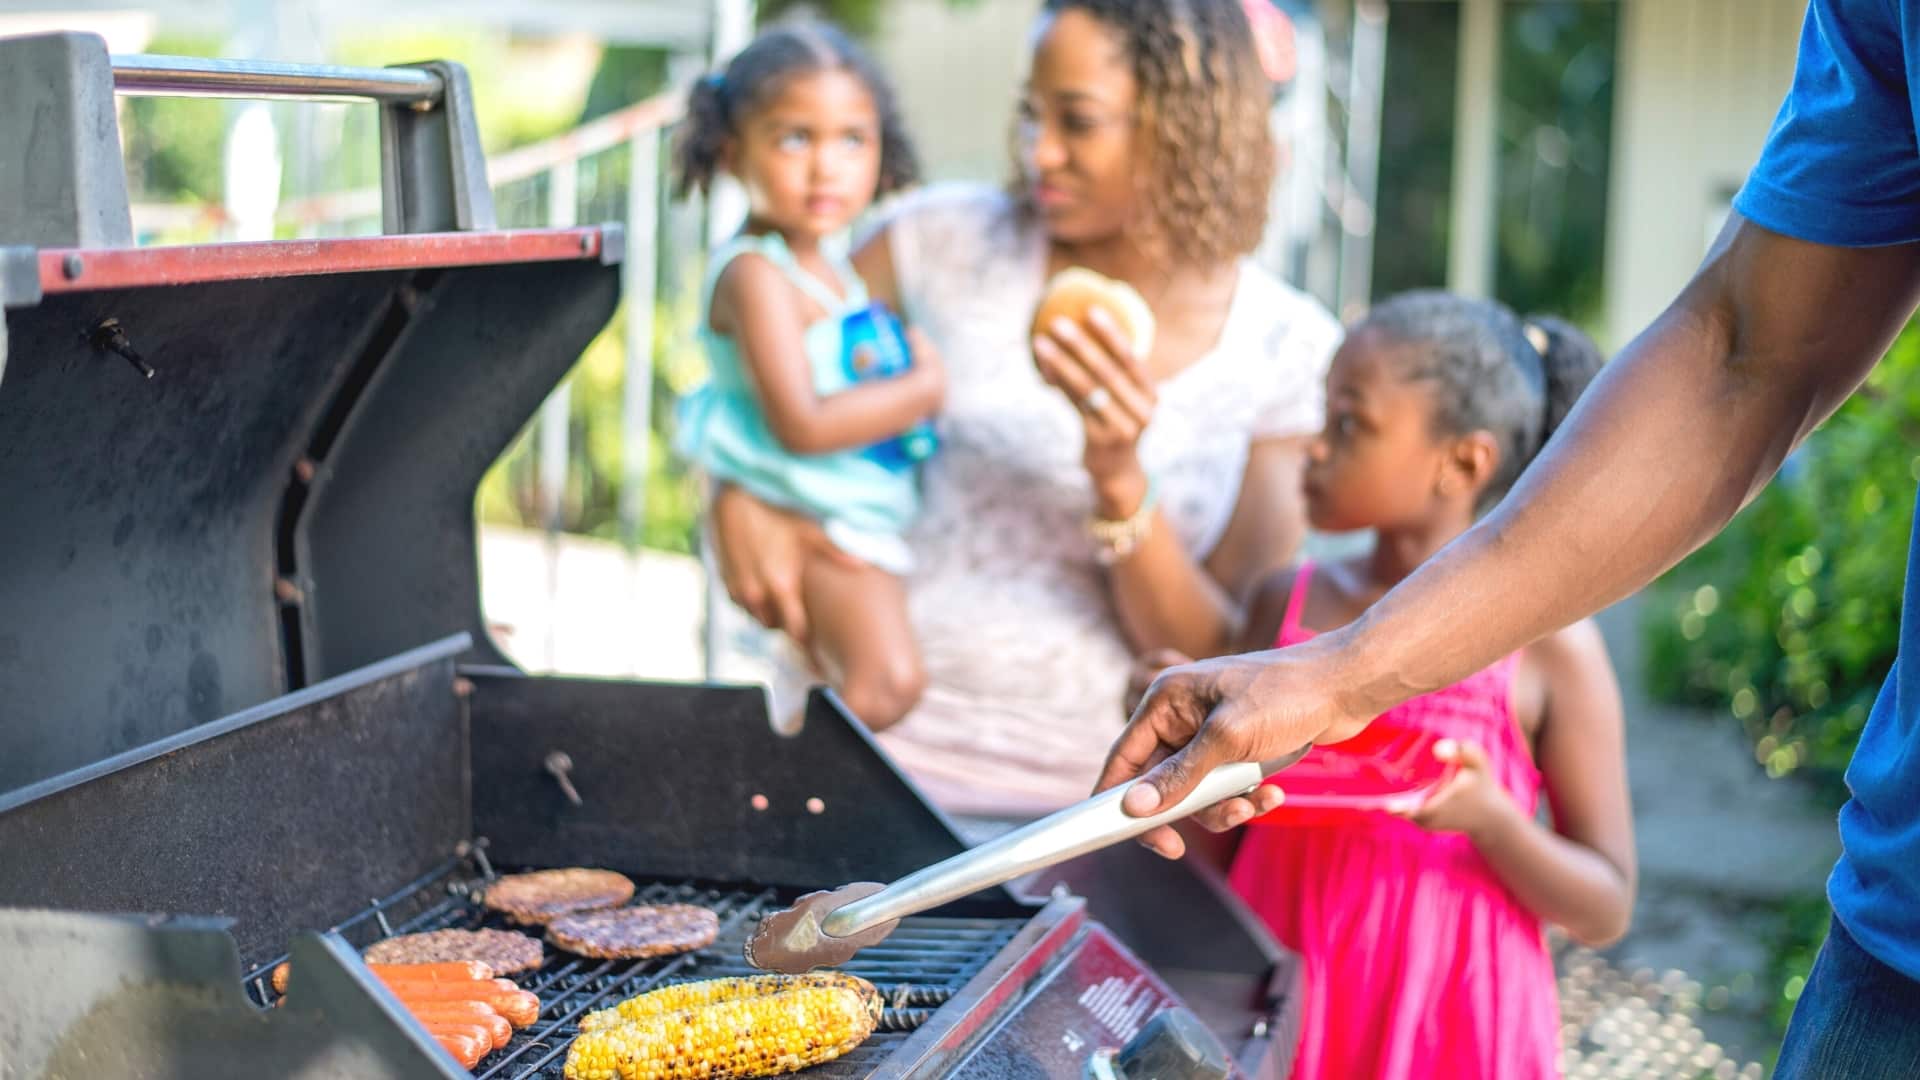 What to Do for Memorial Day in Orlando - Grill with Family